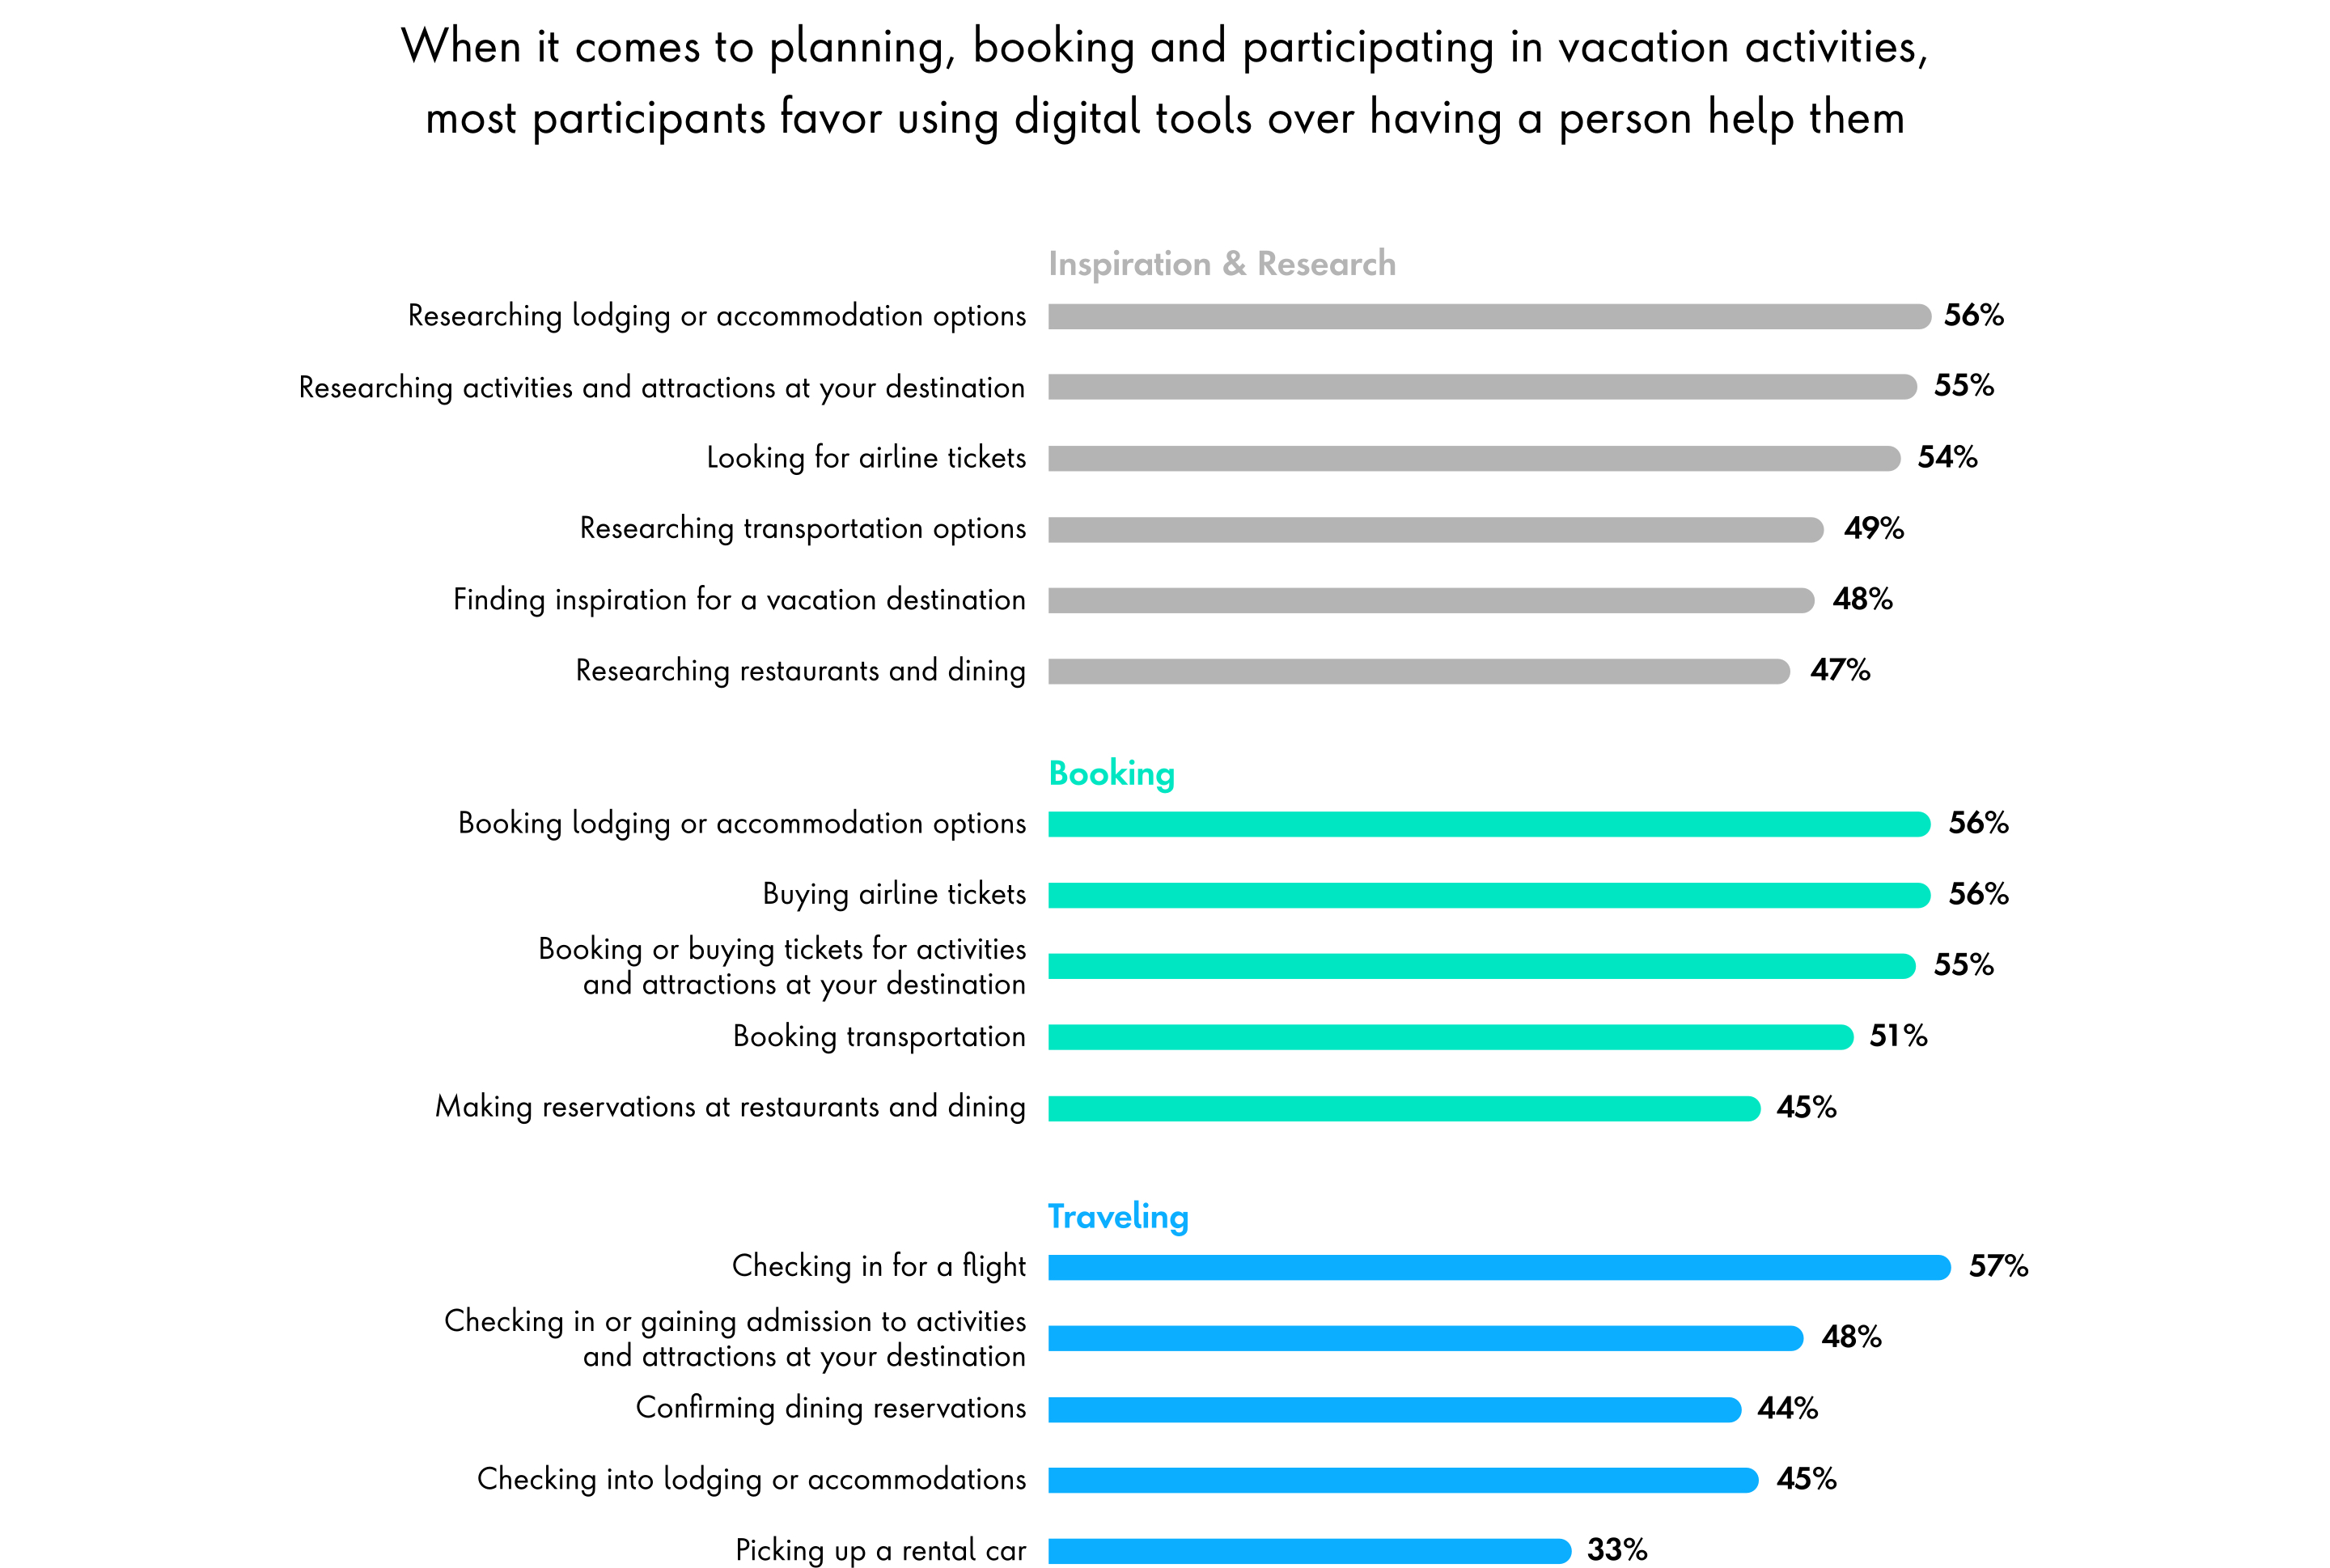 Charts: When it comes to planning, booking and participating in vacation activities, most participants favor using digital tools over having a person help them